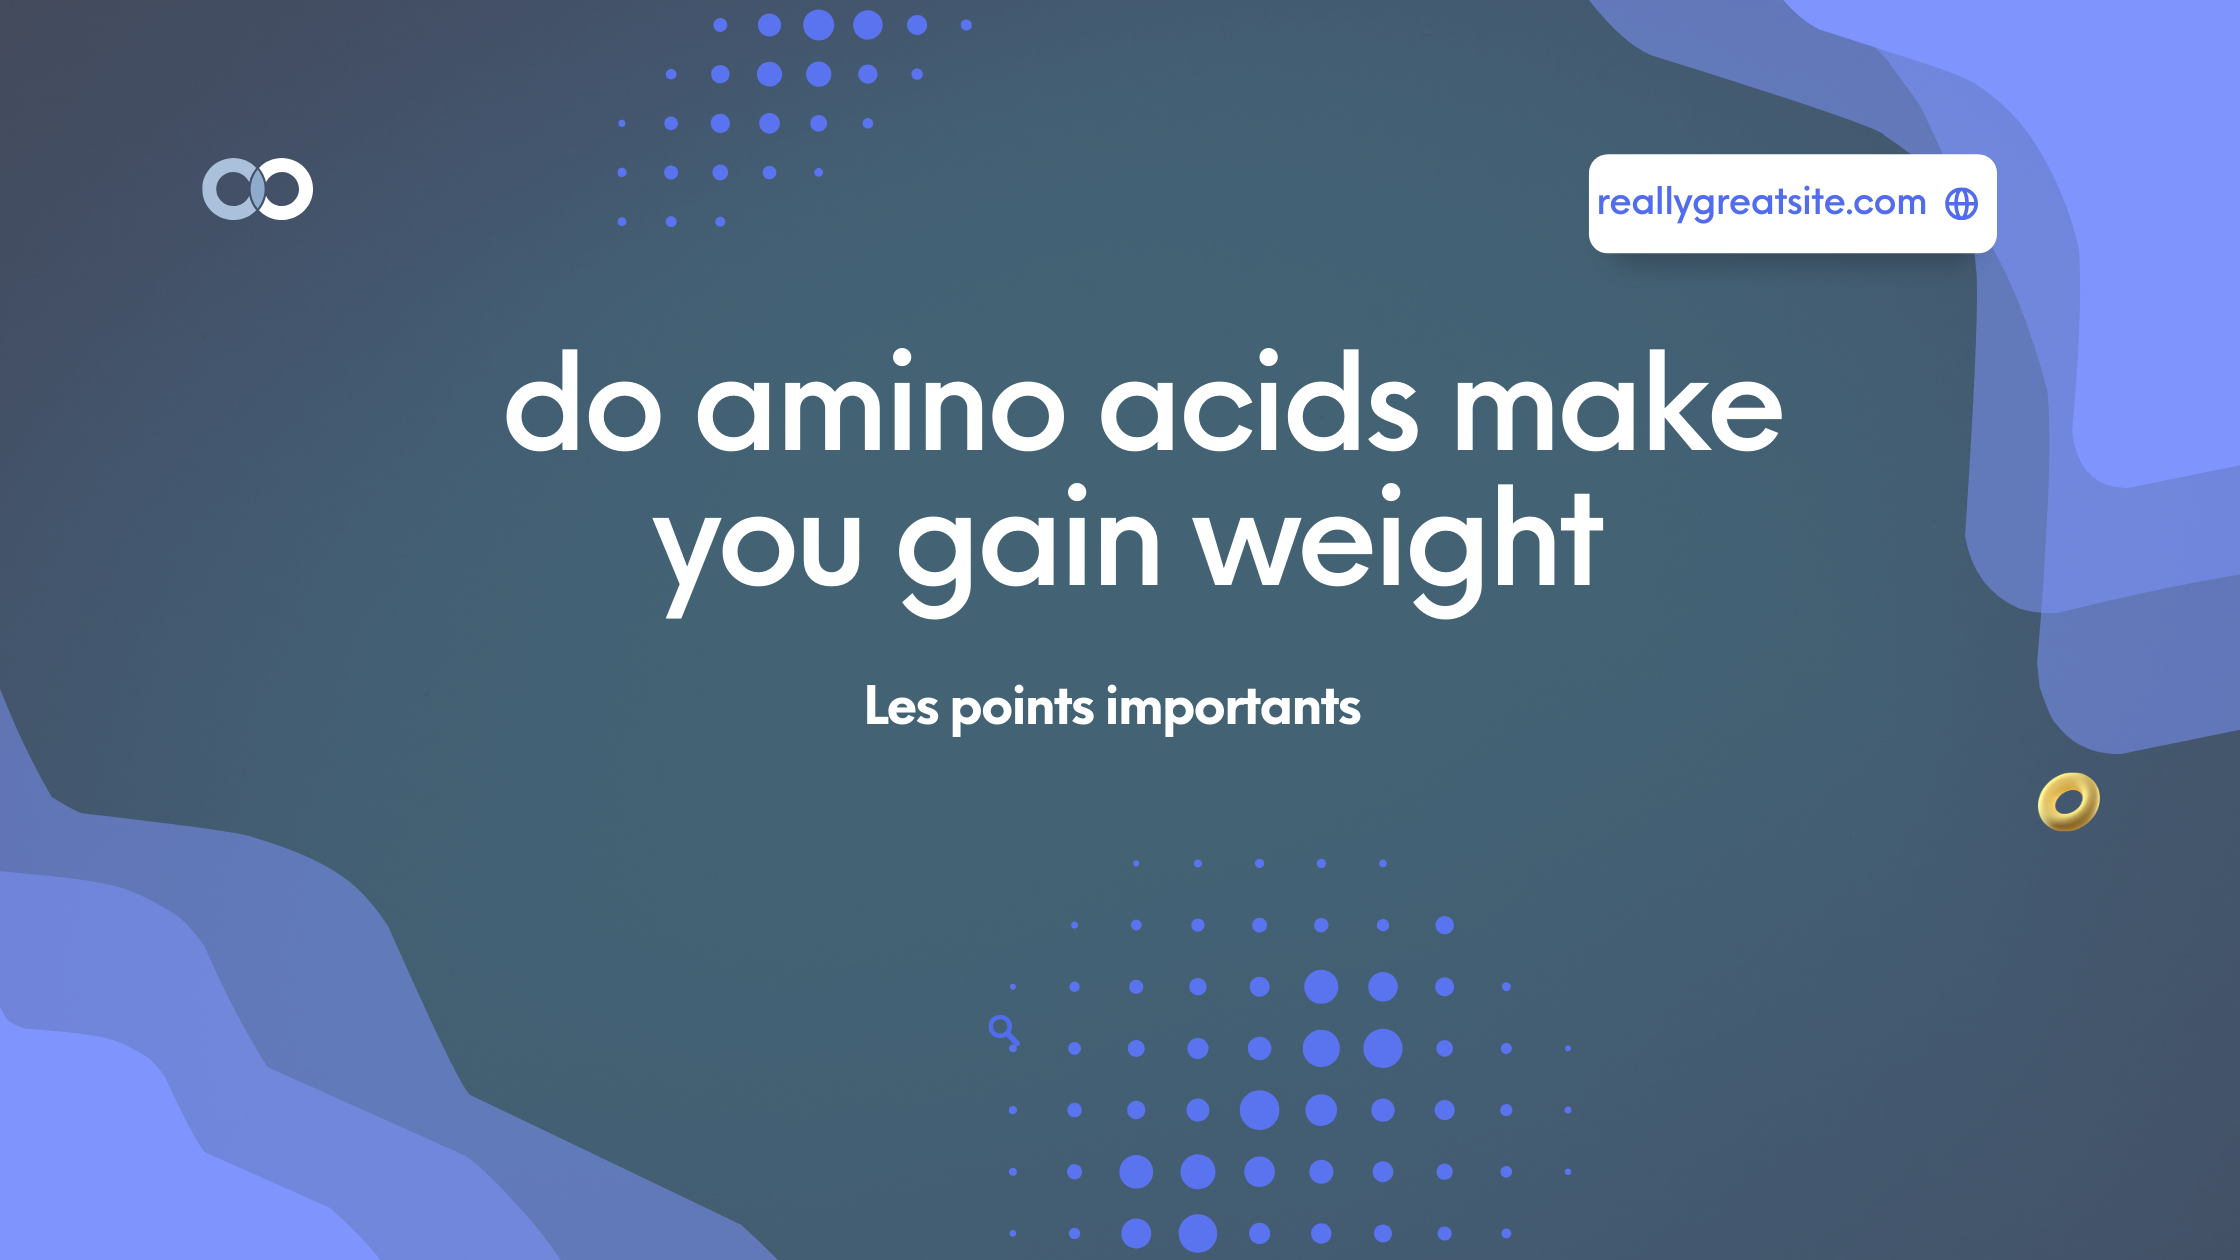 do amino acids make you gain weight | Les points importants